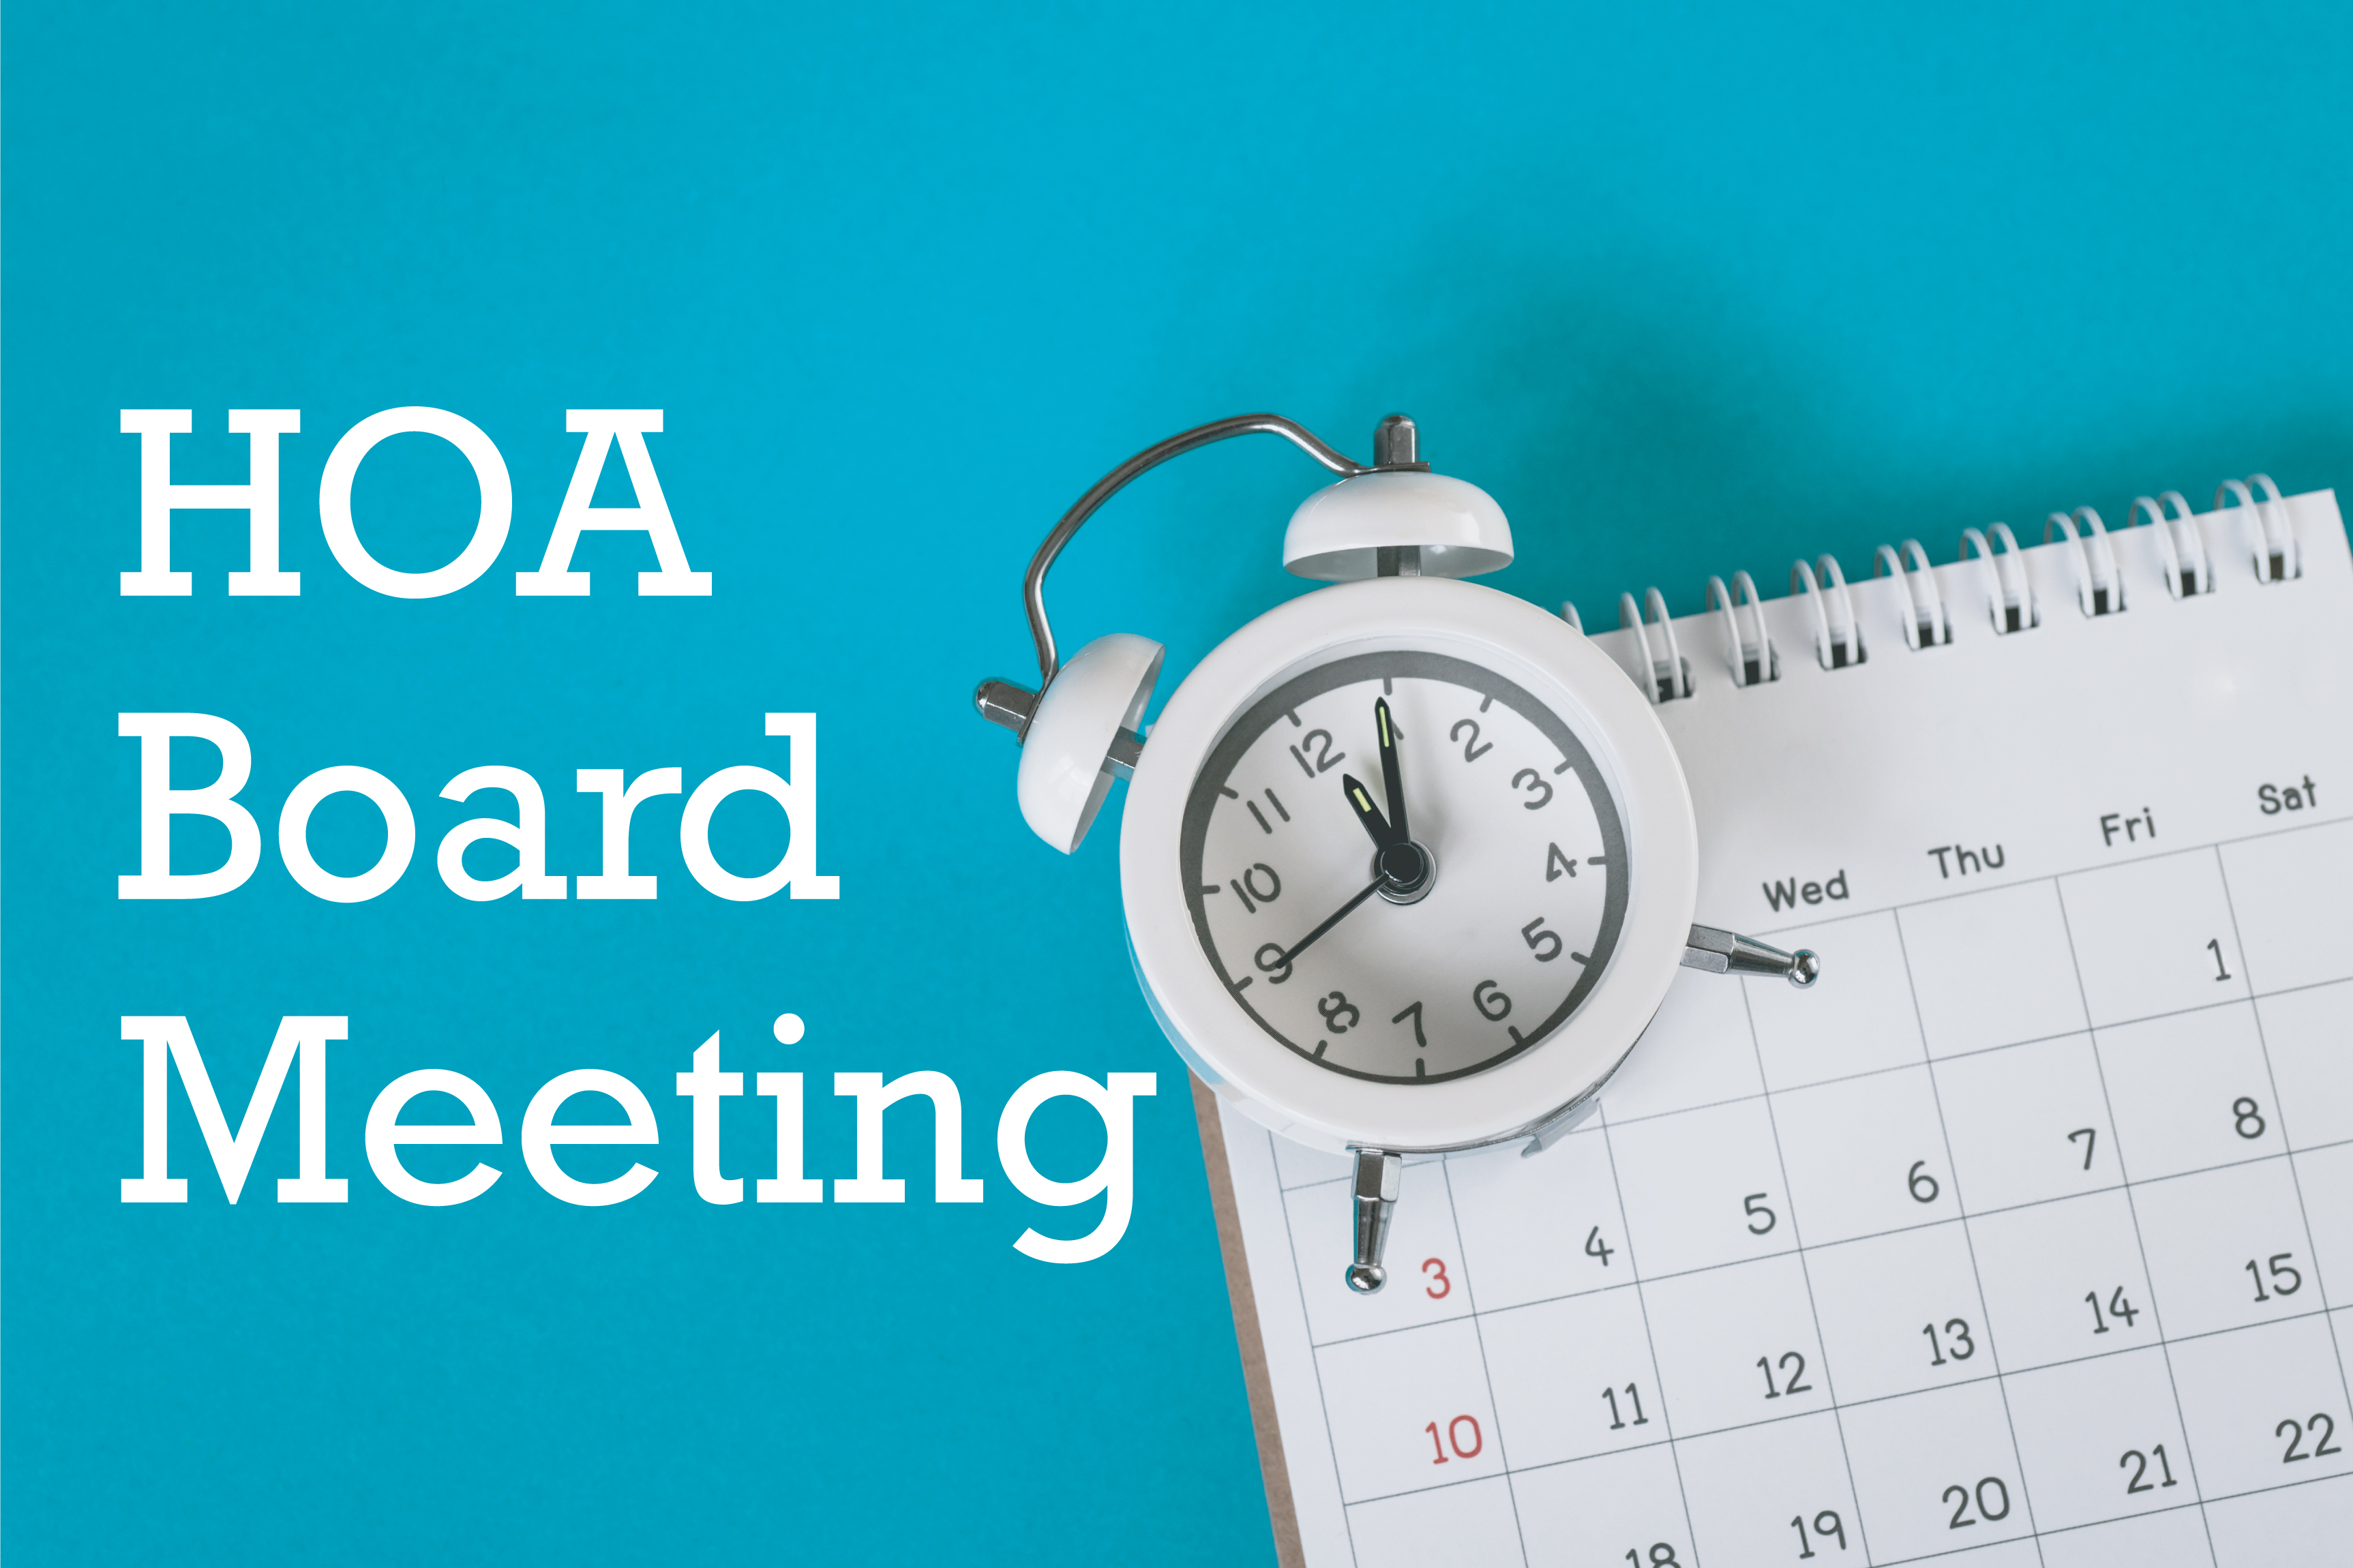 WSMA Board Meeting Scheduled for October 17